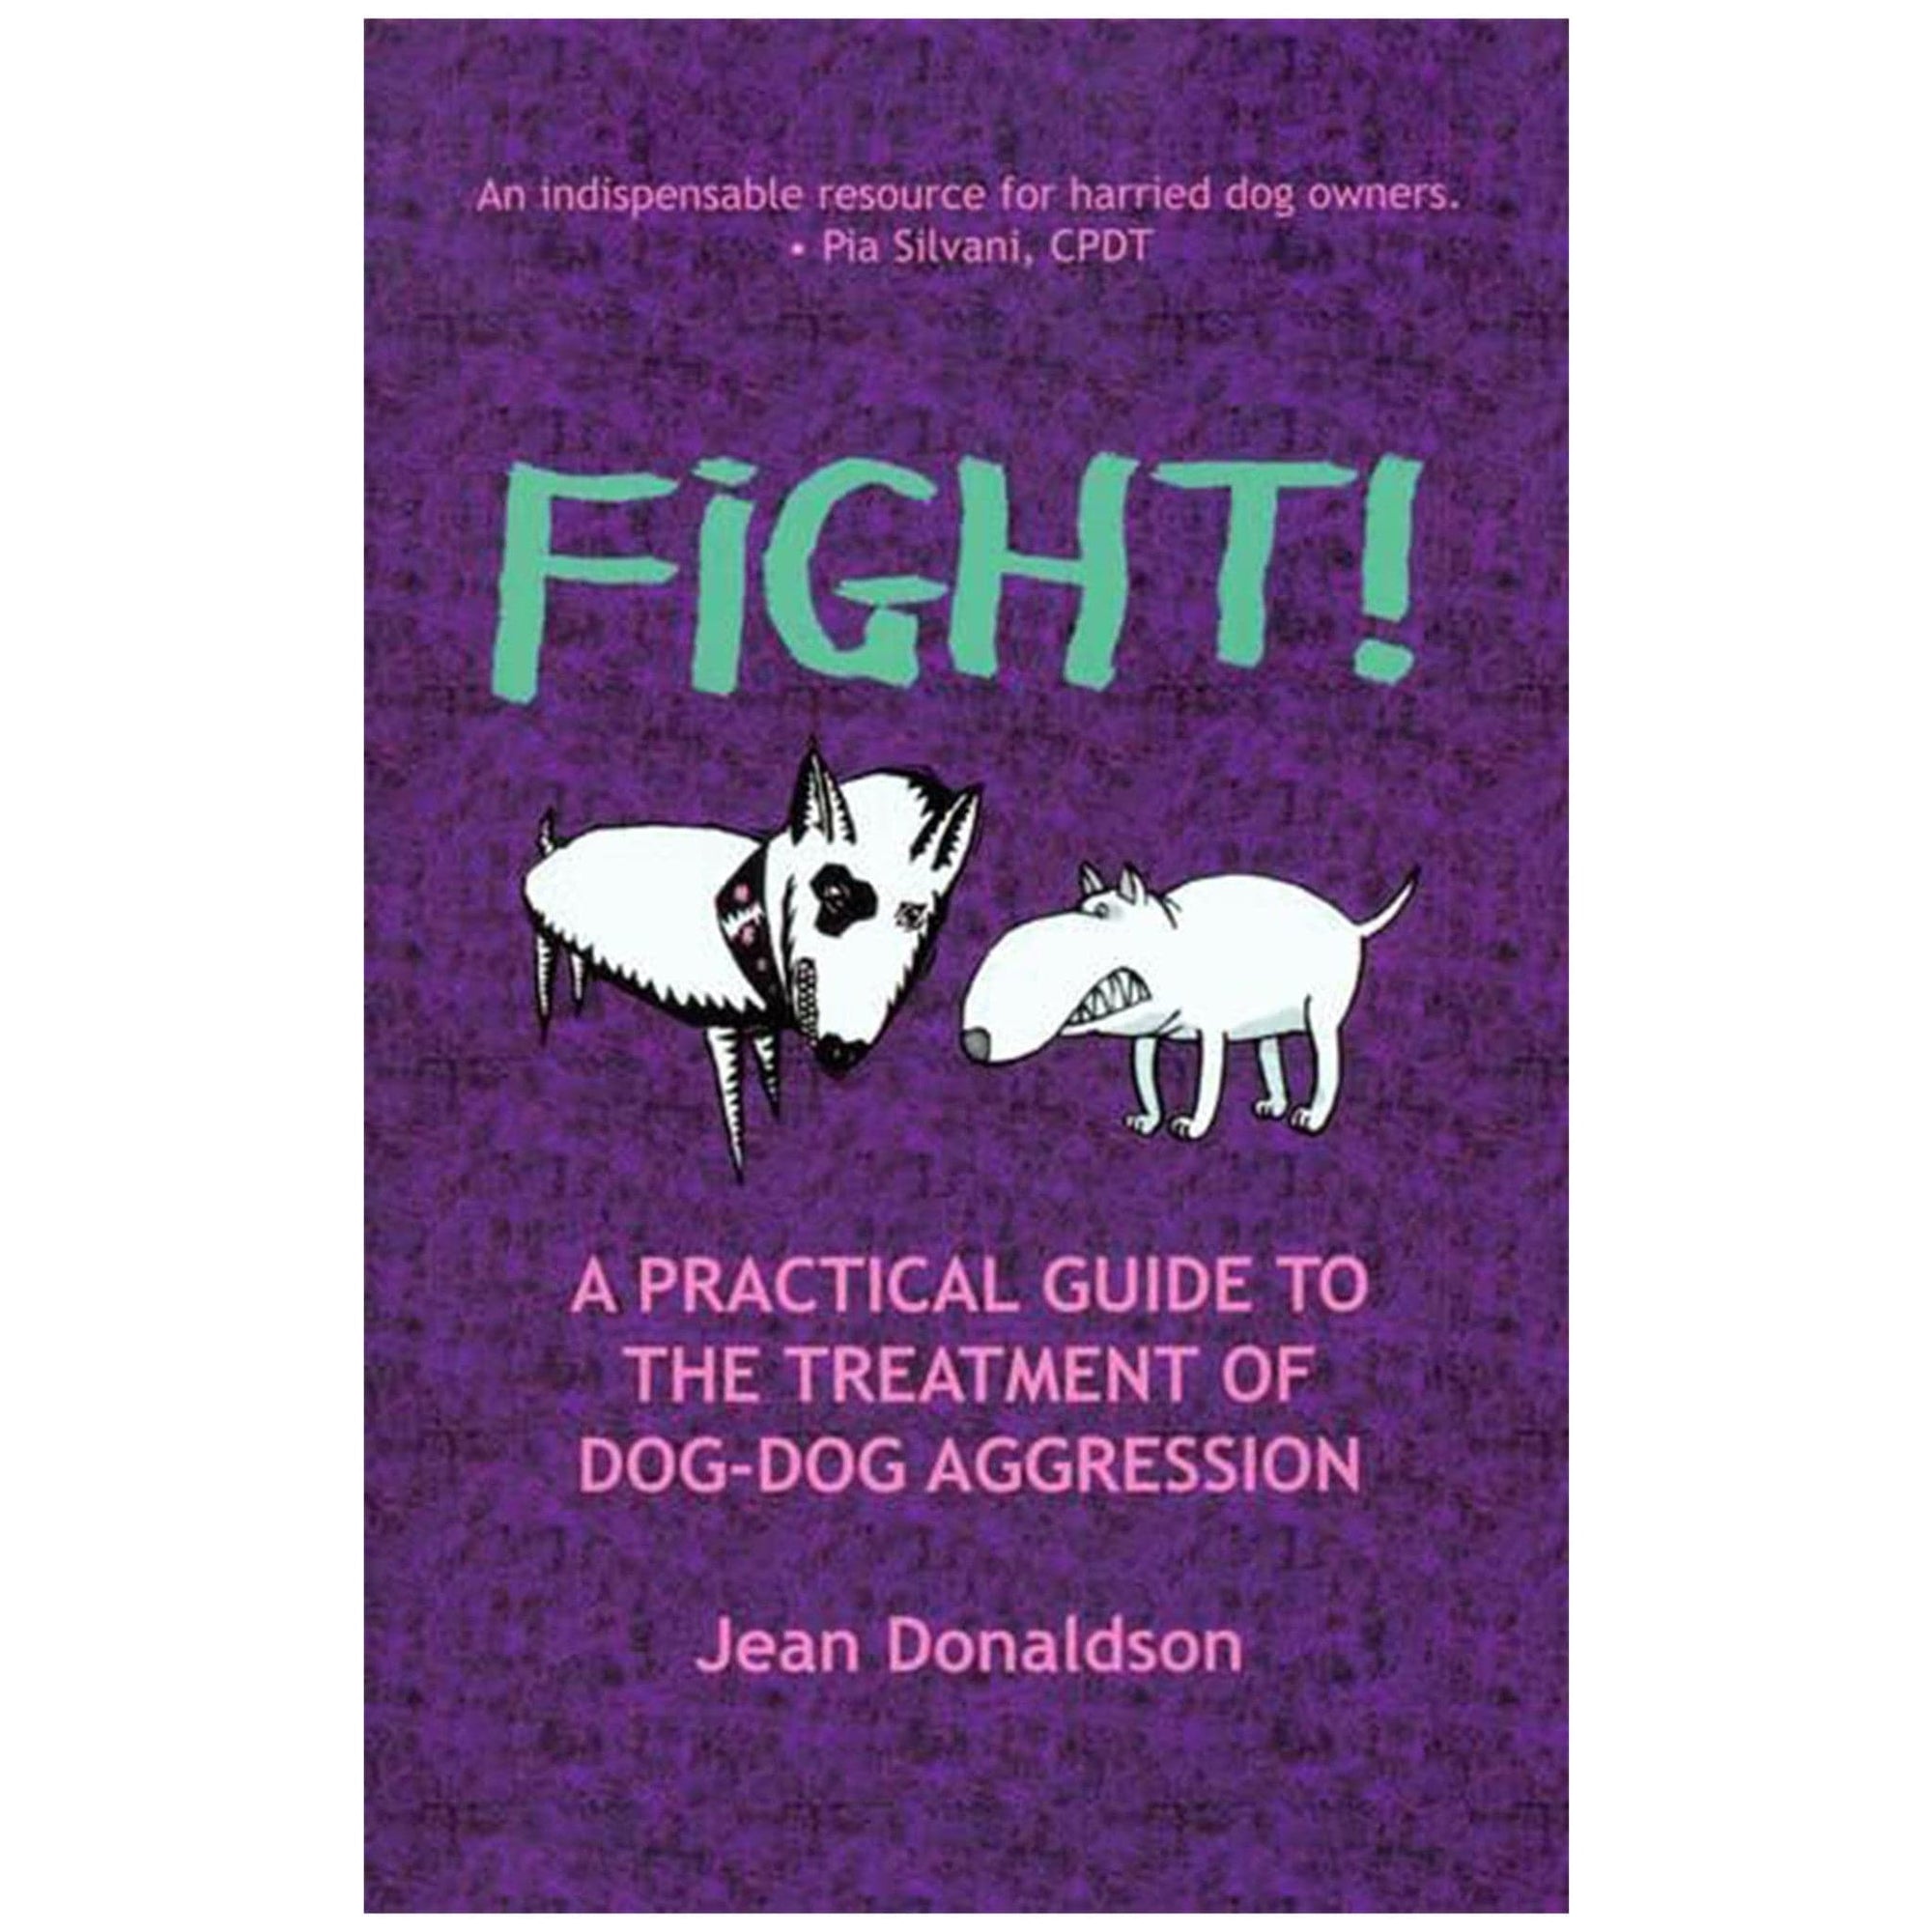 Fight! A Practical Guide to the Treatment of Dog-Dog Aggression by Jean Donaldson   e-book